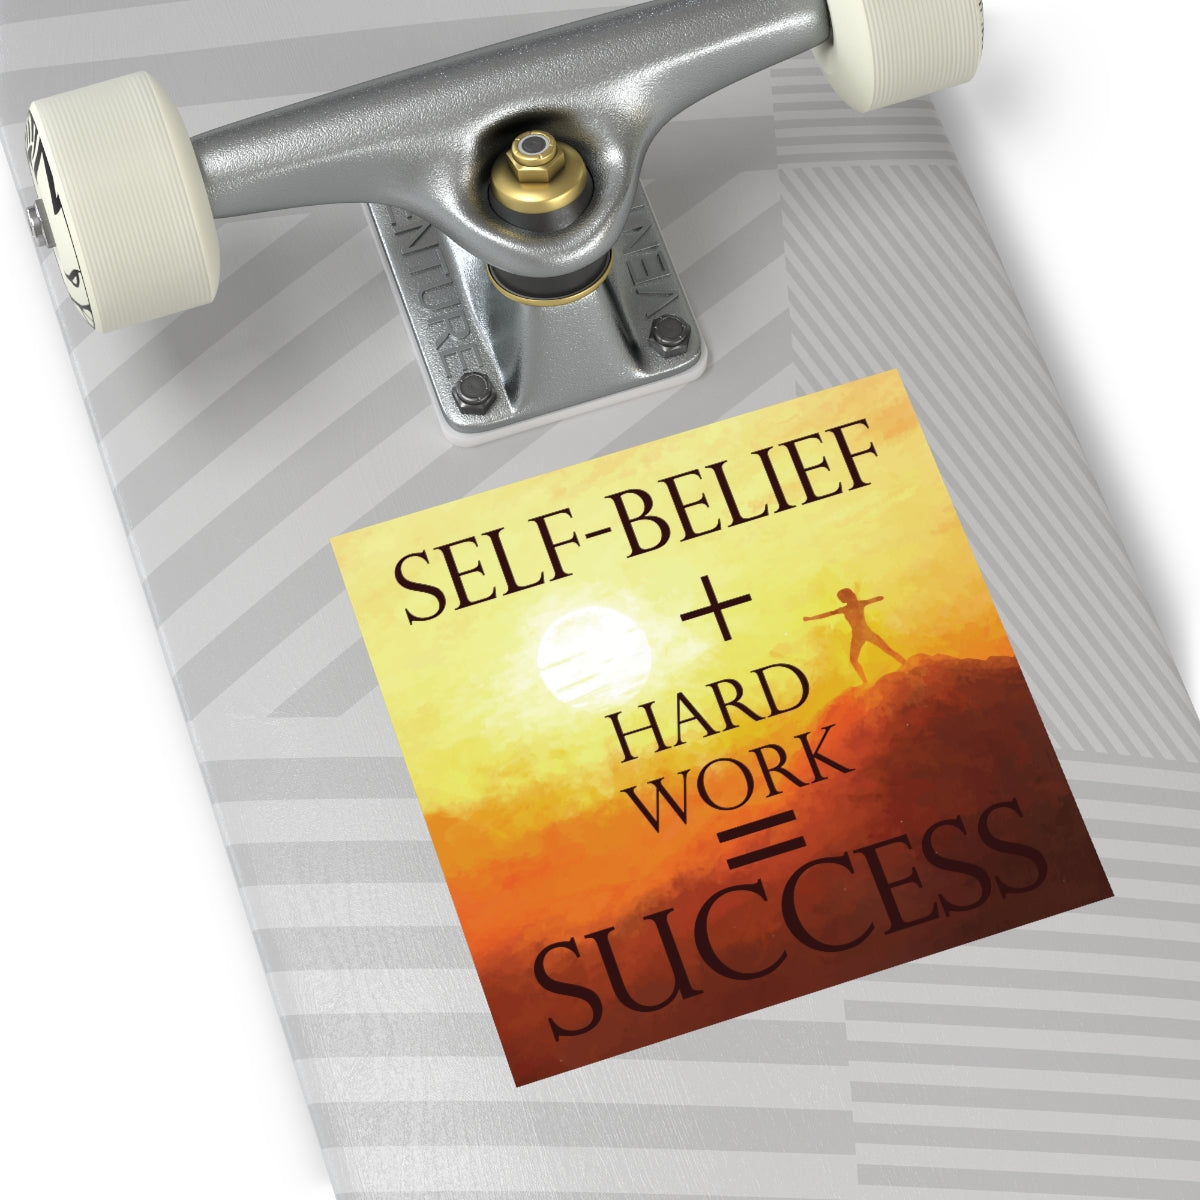 Self-belief and hard work sticker | Shop Success Stickers #size_5x5-inches